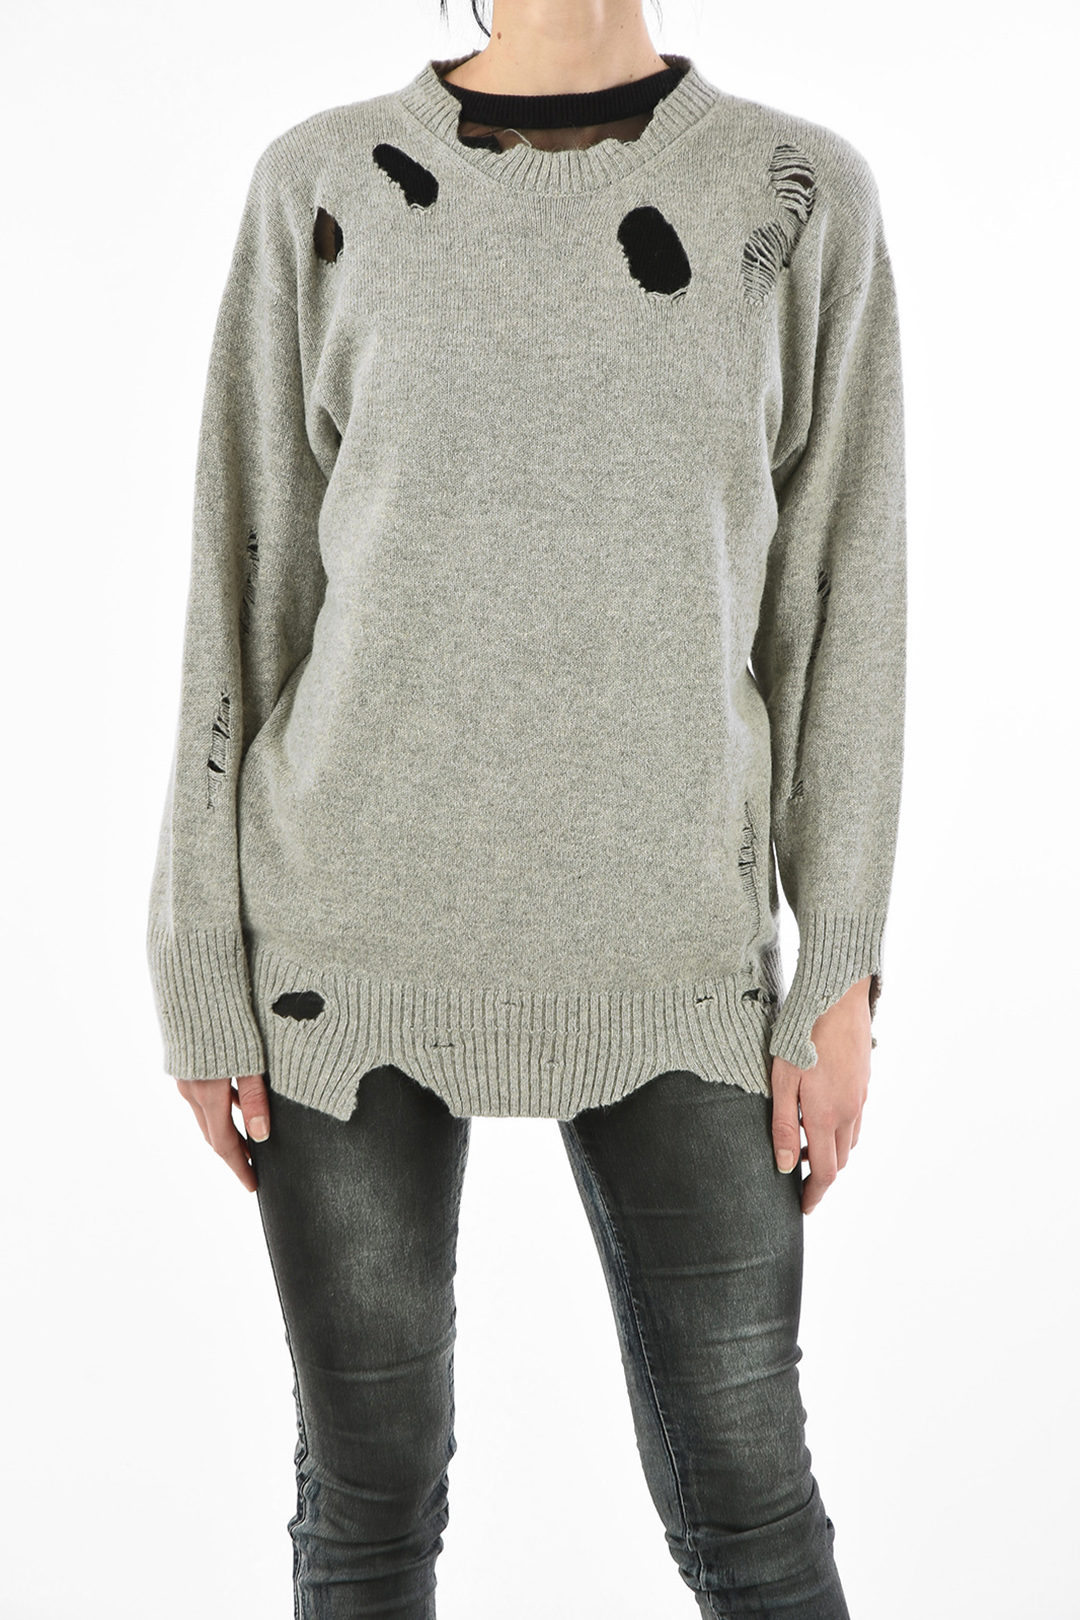 Diesel Distressed Details Oversize M-PURE Sweater women - Glamood Outlet